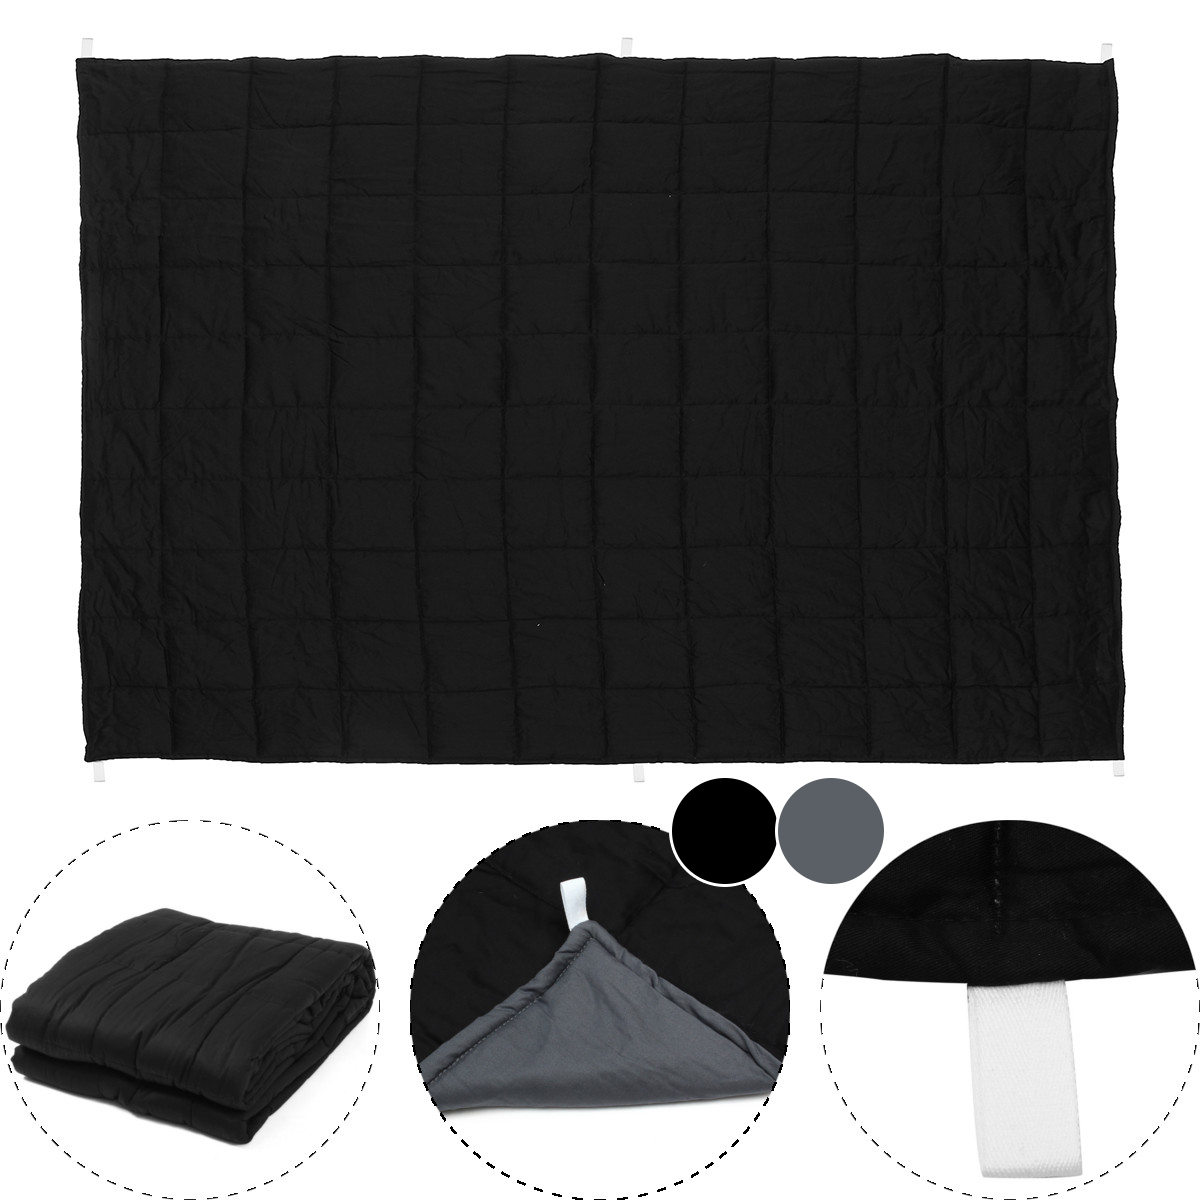 100x150CM-Weighted-Cotton-Blanket-Heavy-Sensory-Relax-45--7--95Kg-Black-Blankets-1349469